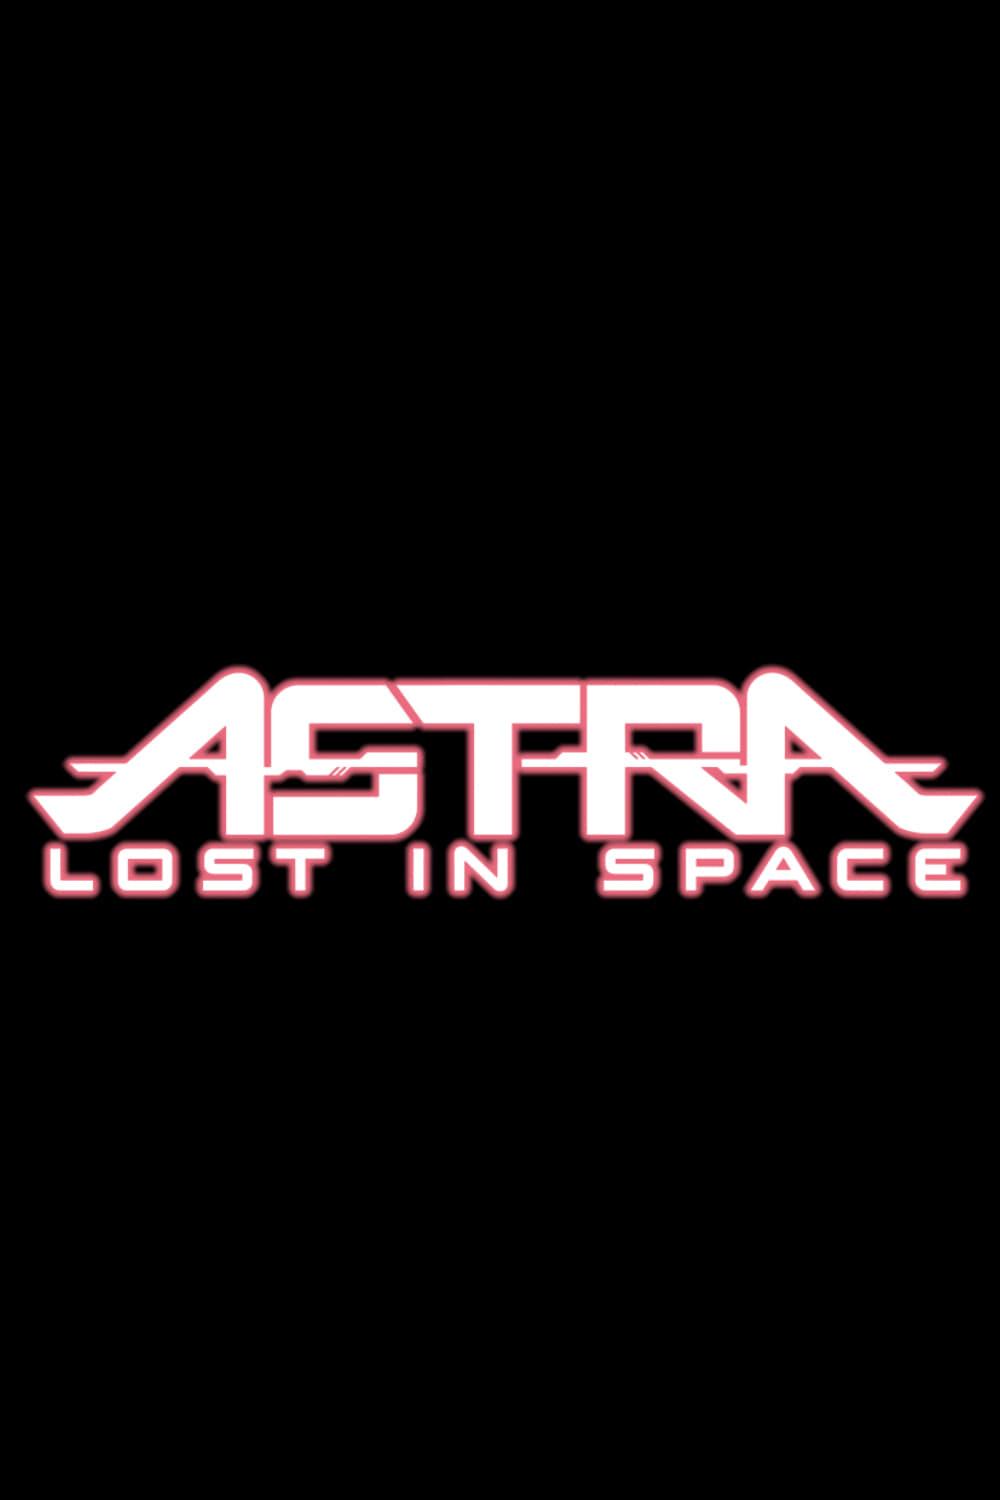 Astra Lost in Space poster